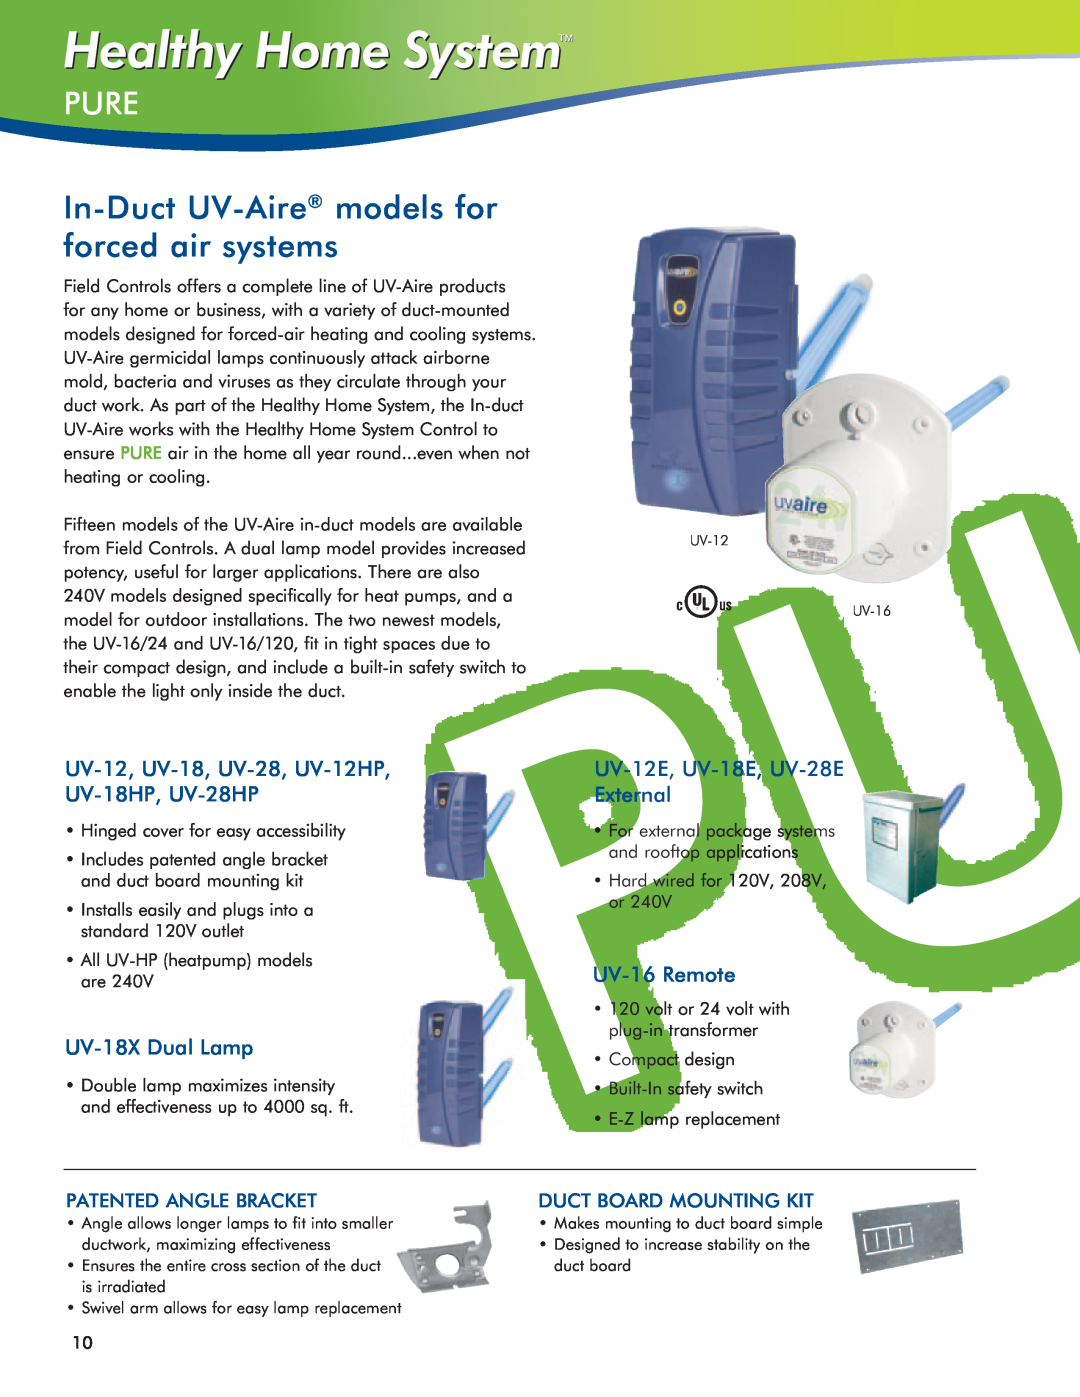 Field Controls IAQ11 Pure, In-Duct UV-Aire models for forced air systems, UV-12, UV-18, UV-28, UV-12HP UV-18HP, UV-28HP 